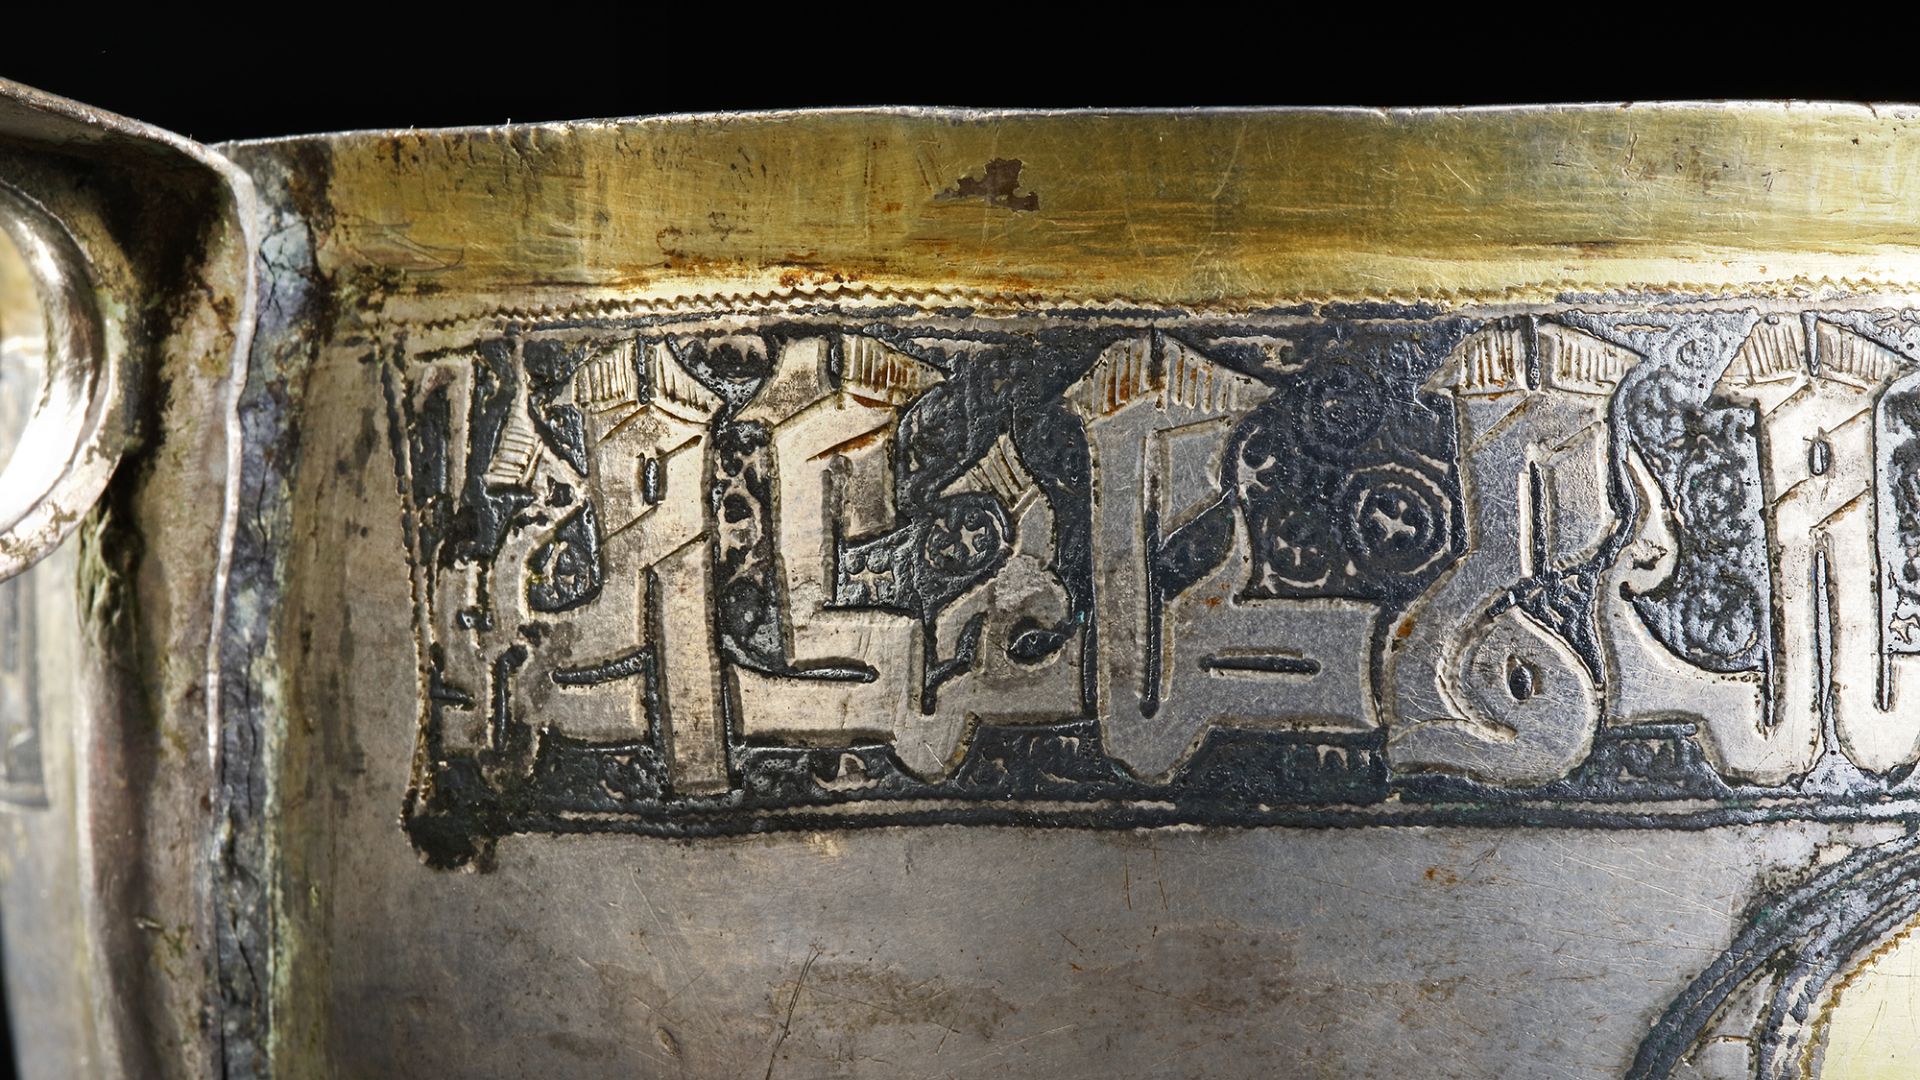 A RARE SILVER AND NIELLOED CUP WITH KUFIC INSCRIPTION, PERSIA OR CENTRAL ASIA, 11TH-12TH CENTURY - Image 34 of 34